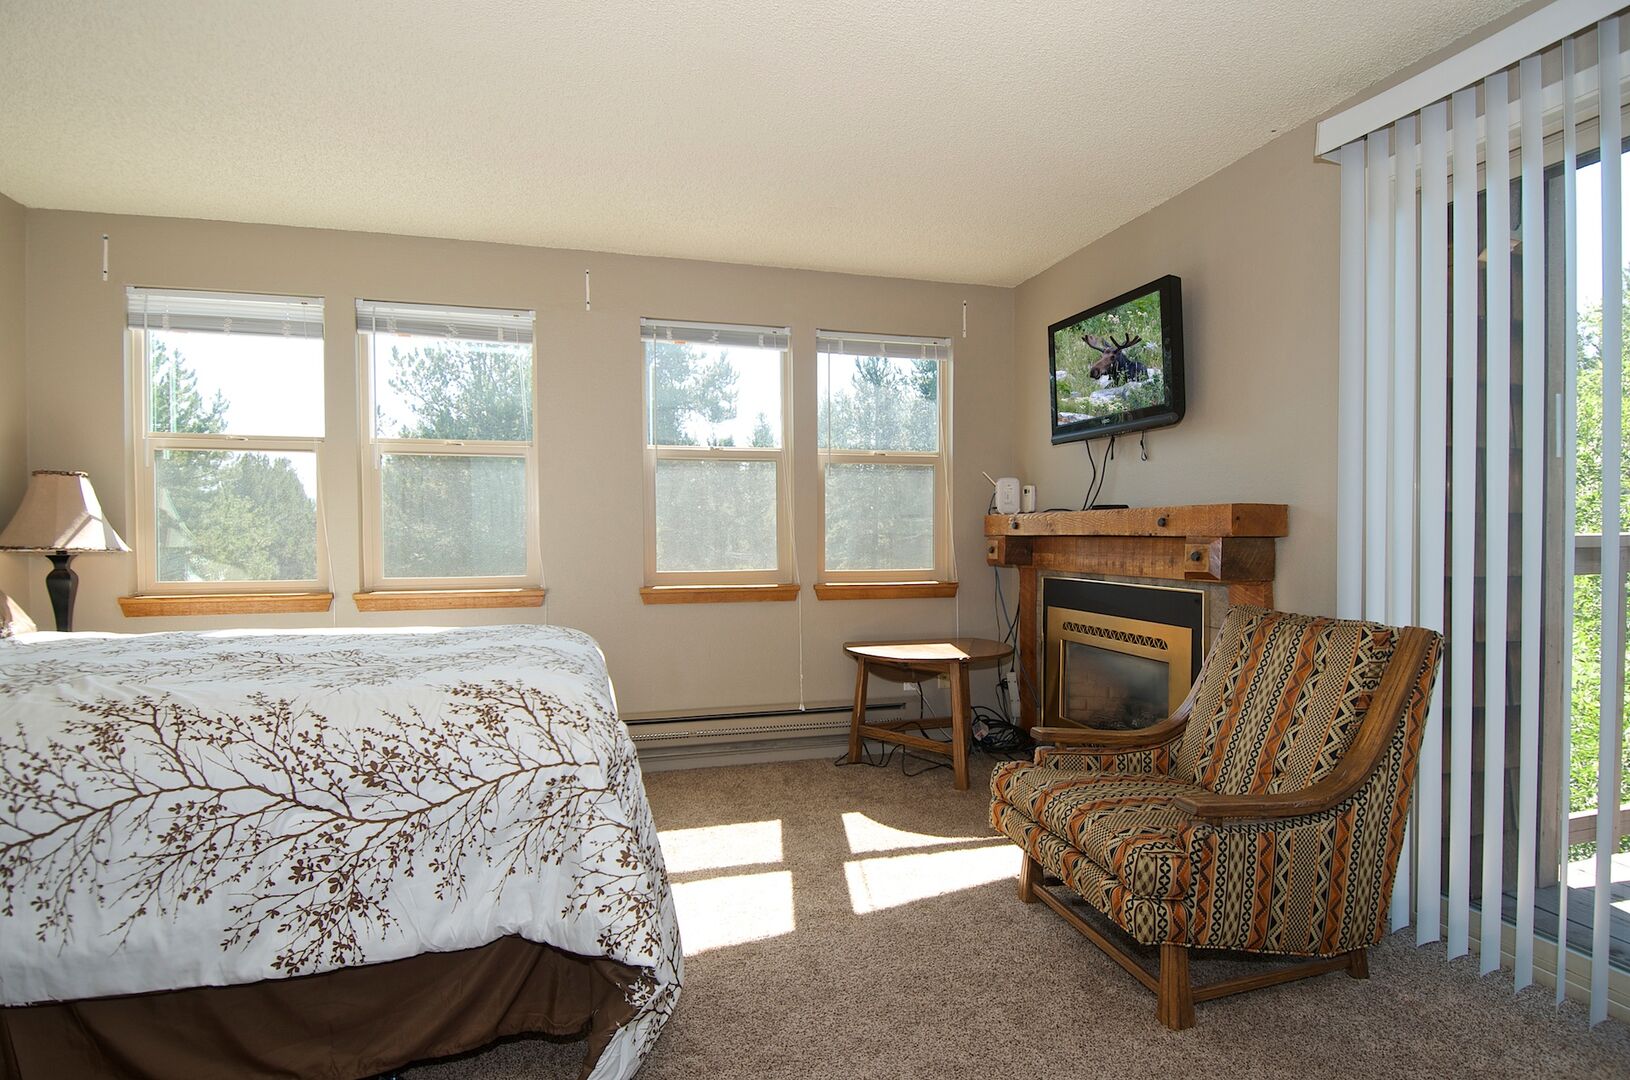 Quickdraw ~ bedroom #3 on upper level w/ queen bed, private entrance to shared bathroom, and private balcony